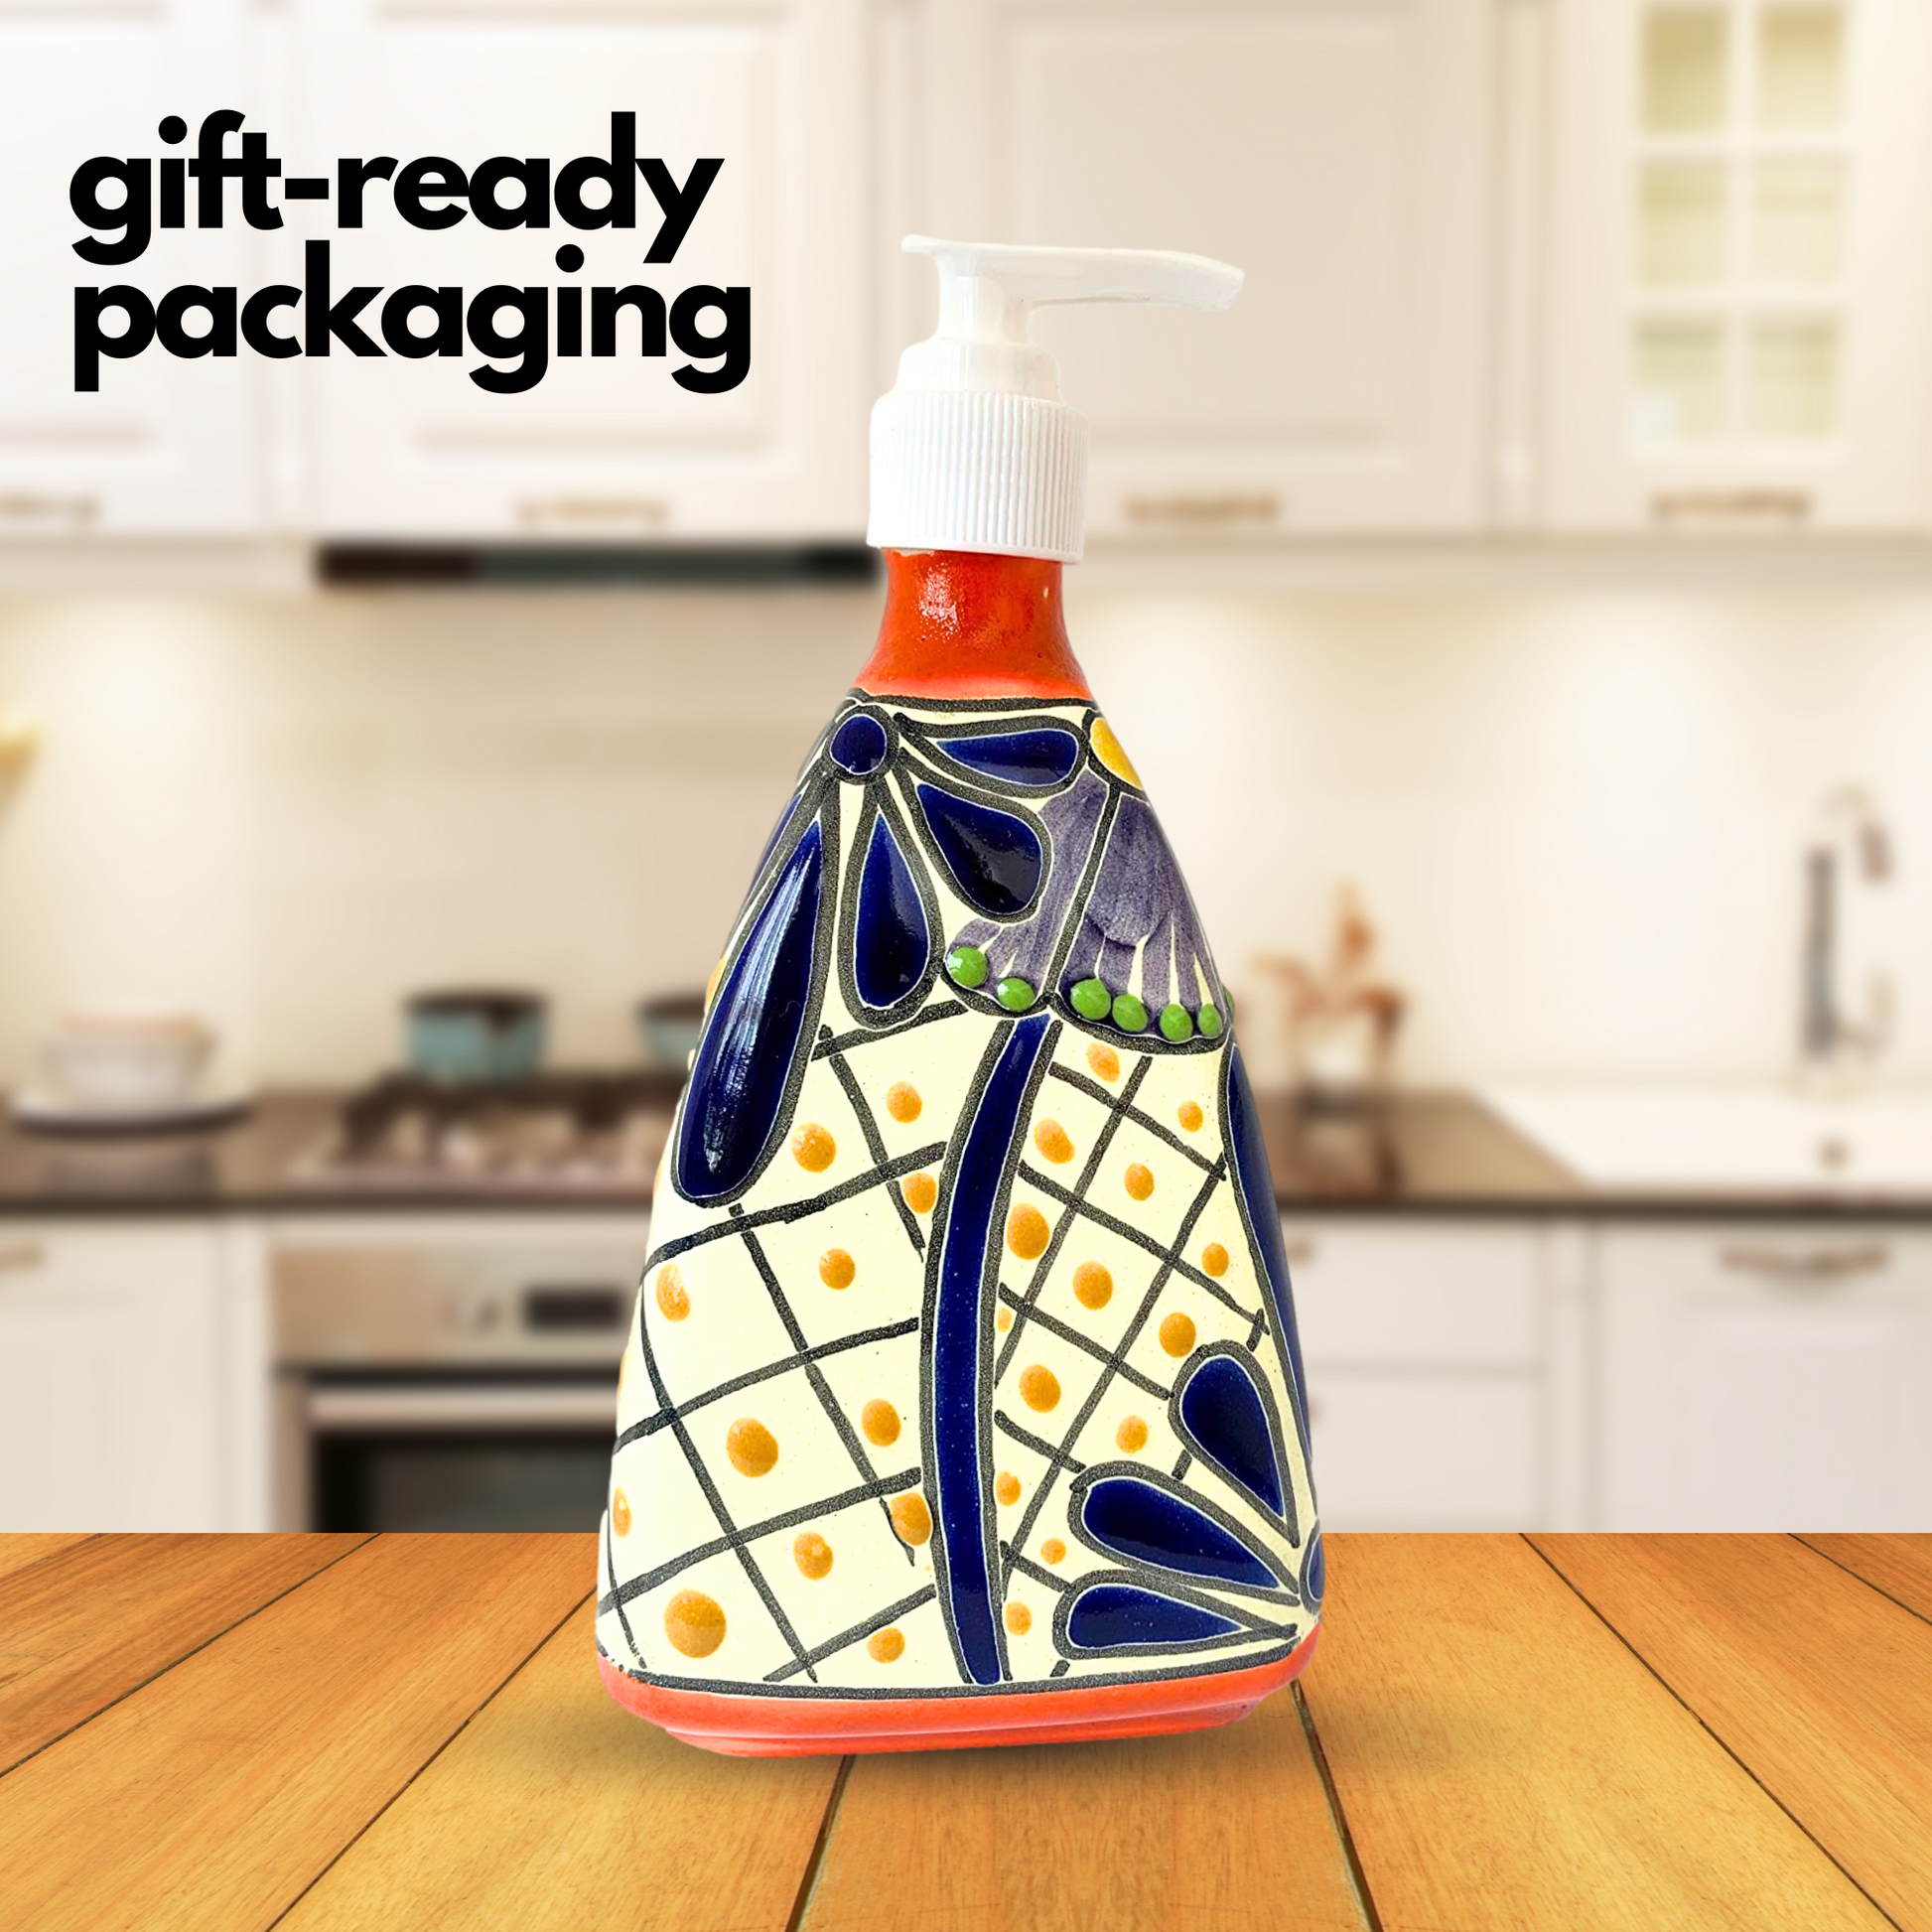 Pyramid-shaped Ceramic Soap Dispenser, hand-painted by Mexican artisans, perfect for adding a vibrant touch to kitchen or bathroom decor on the kitchen